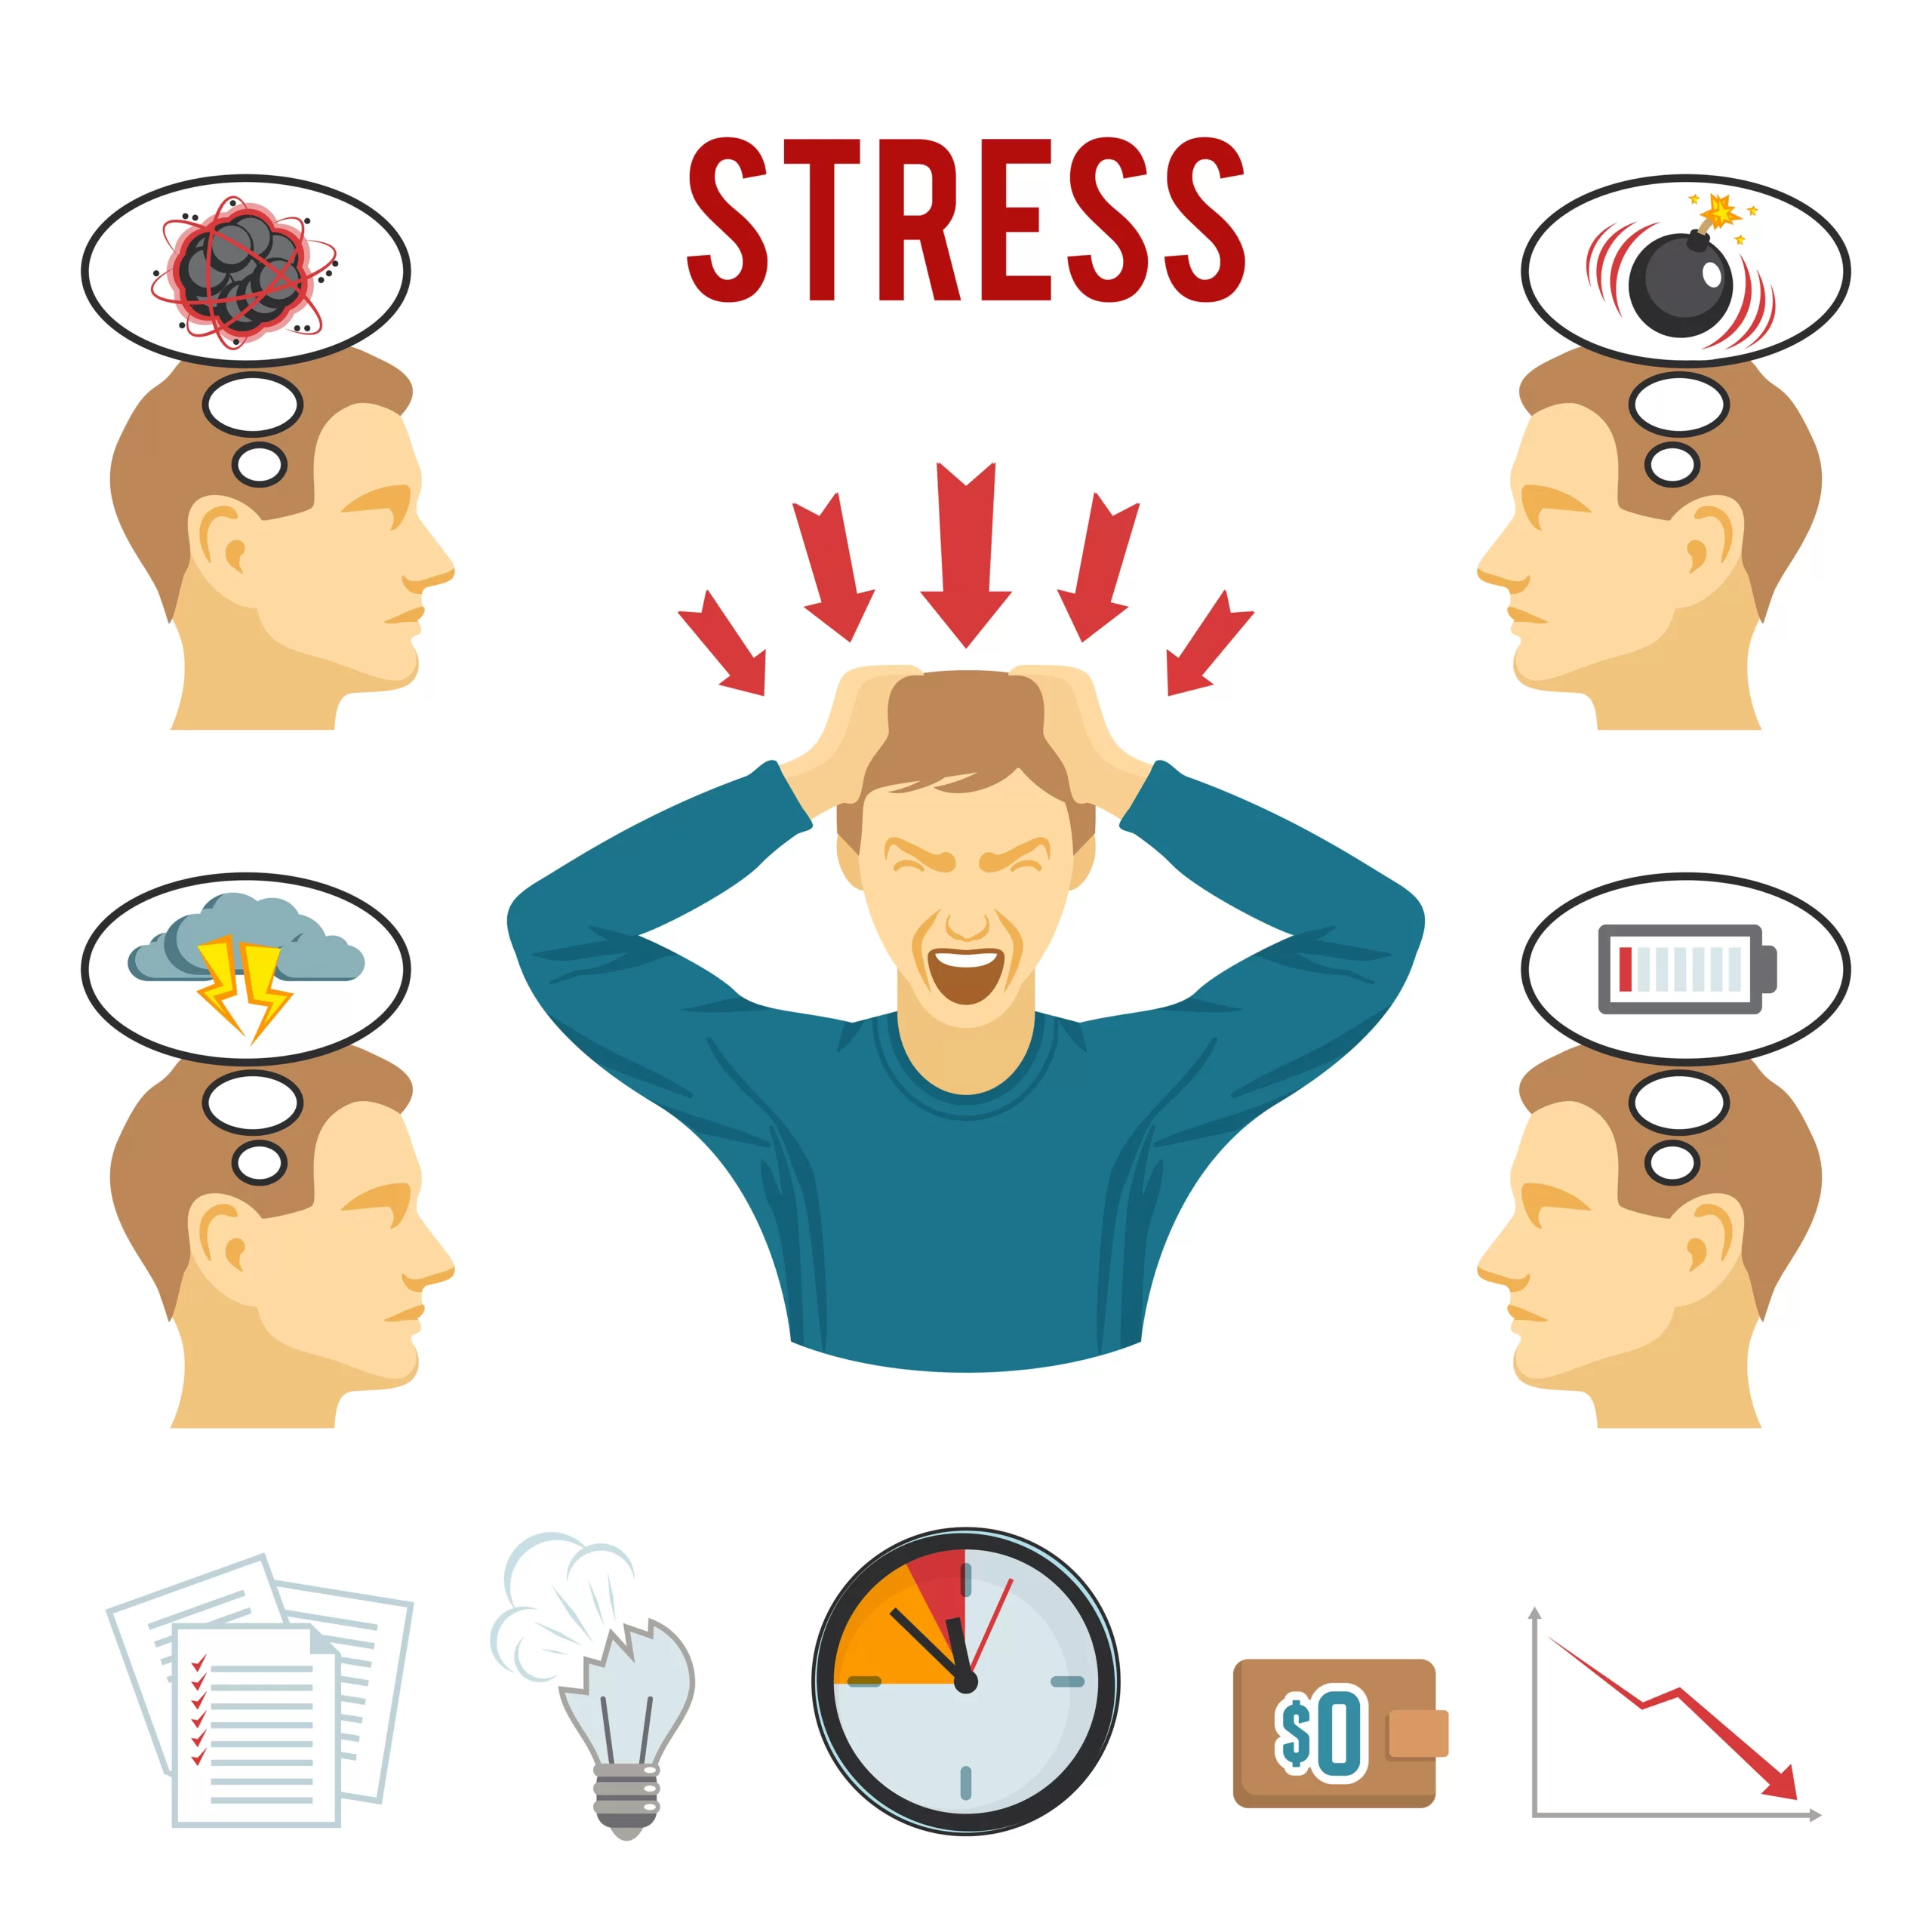 Strategies for Managing Stress